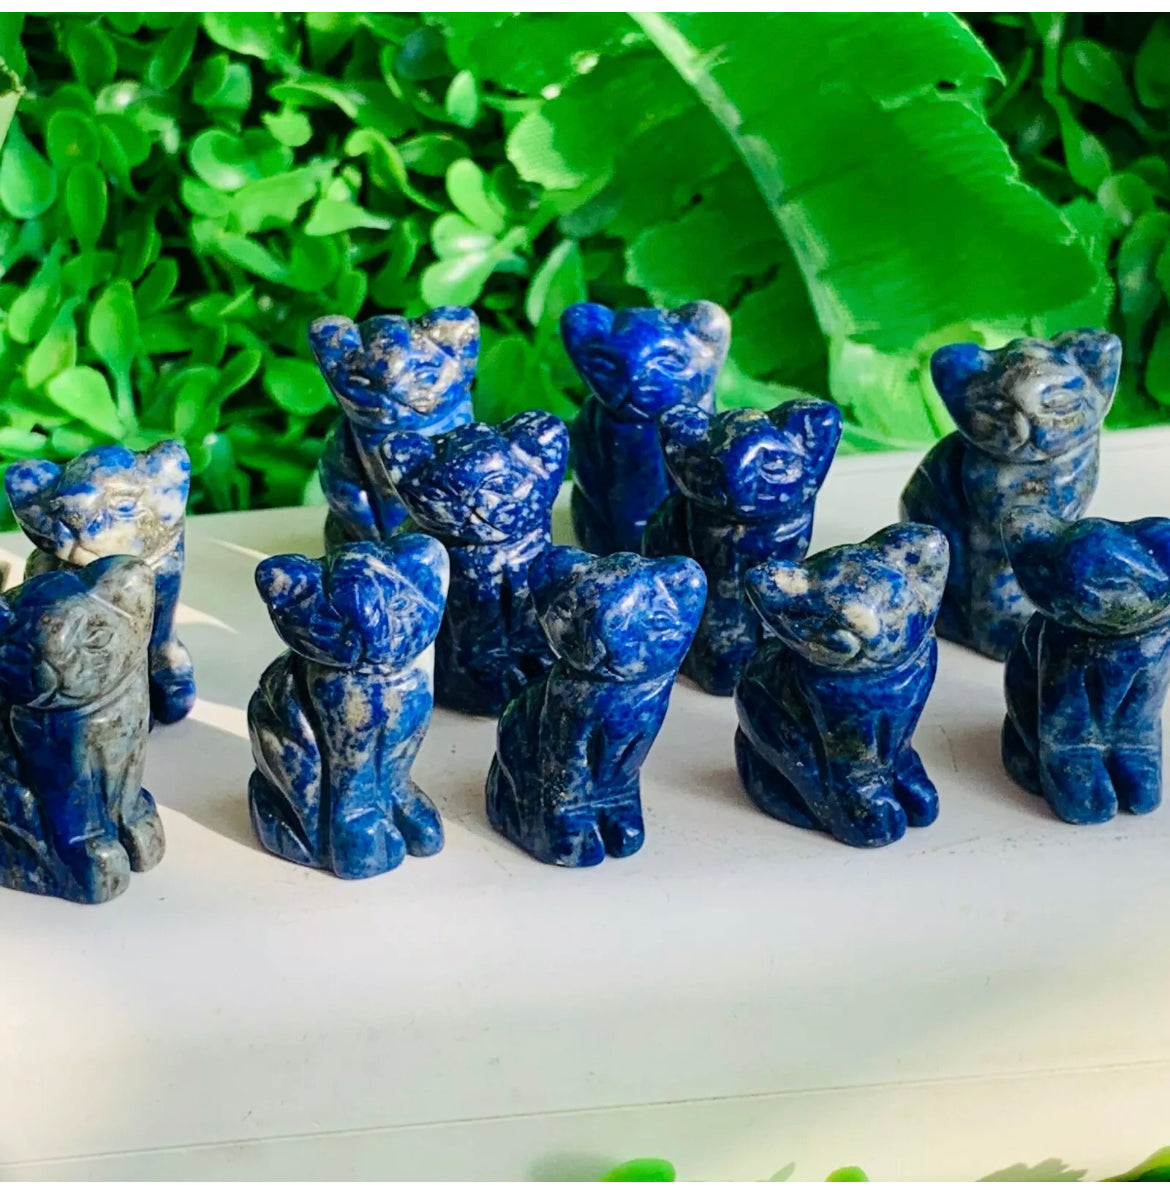 Natural lapis lazuli kitty cat carved crystal